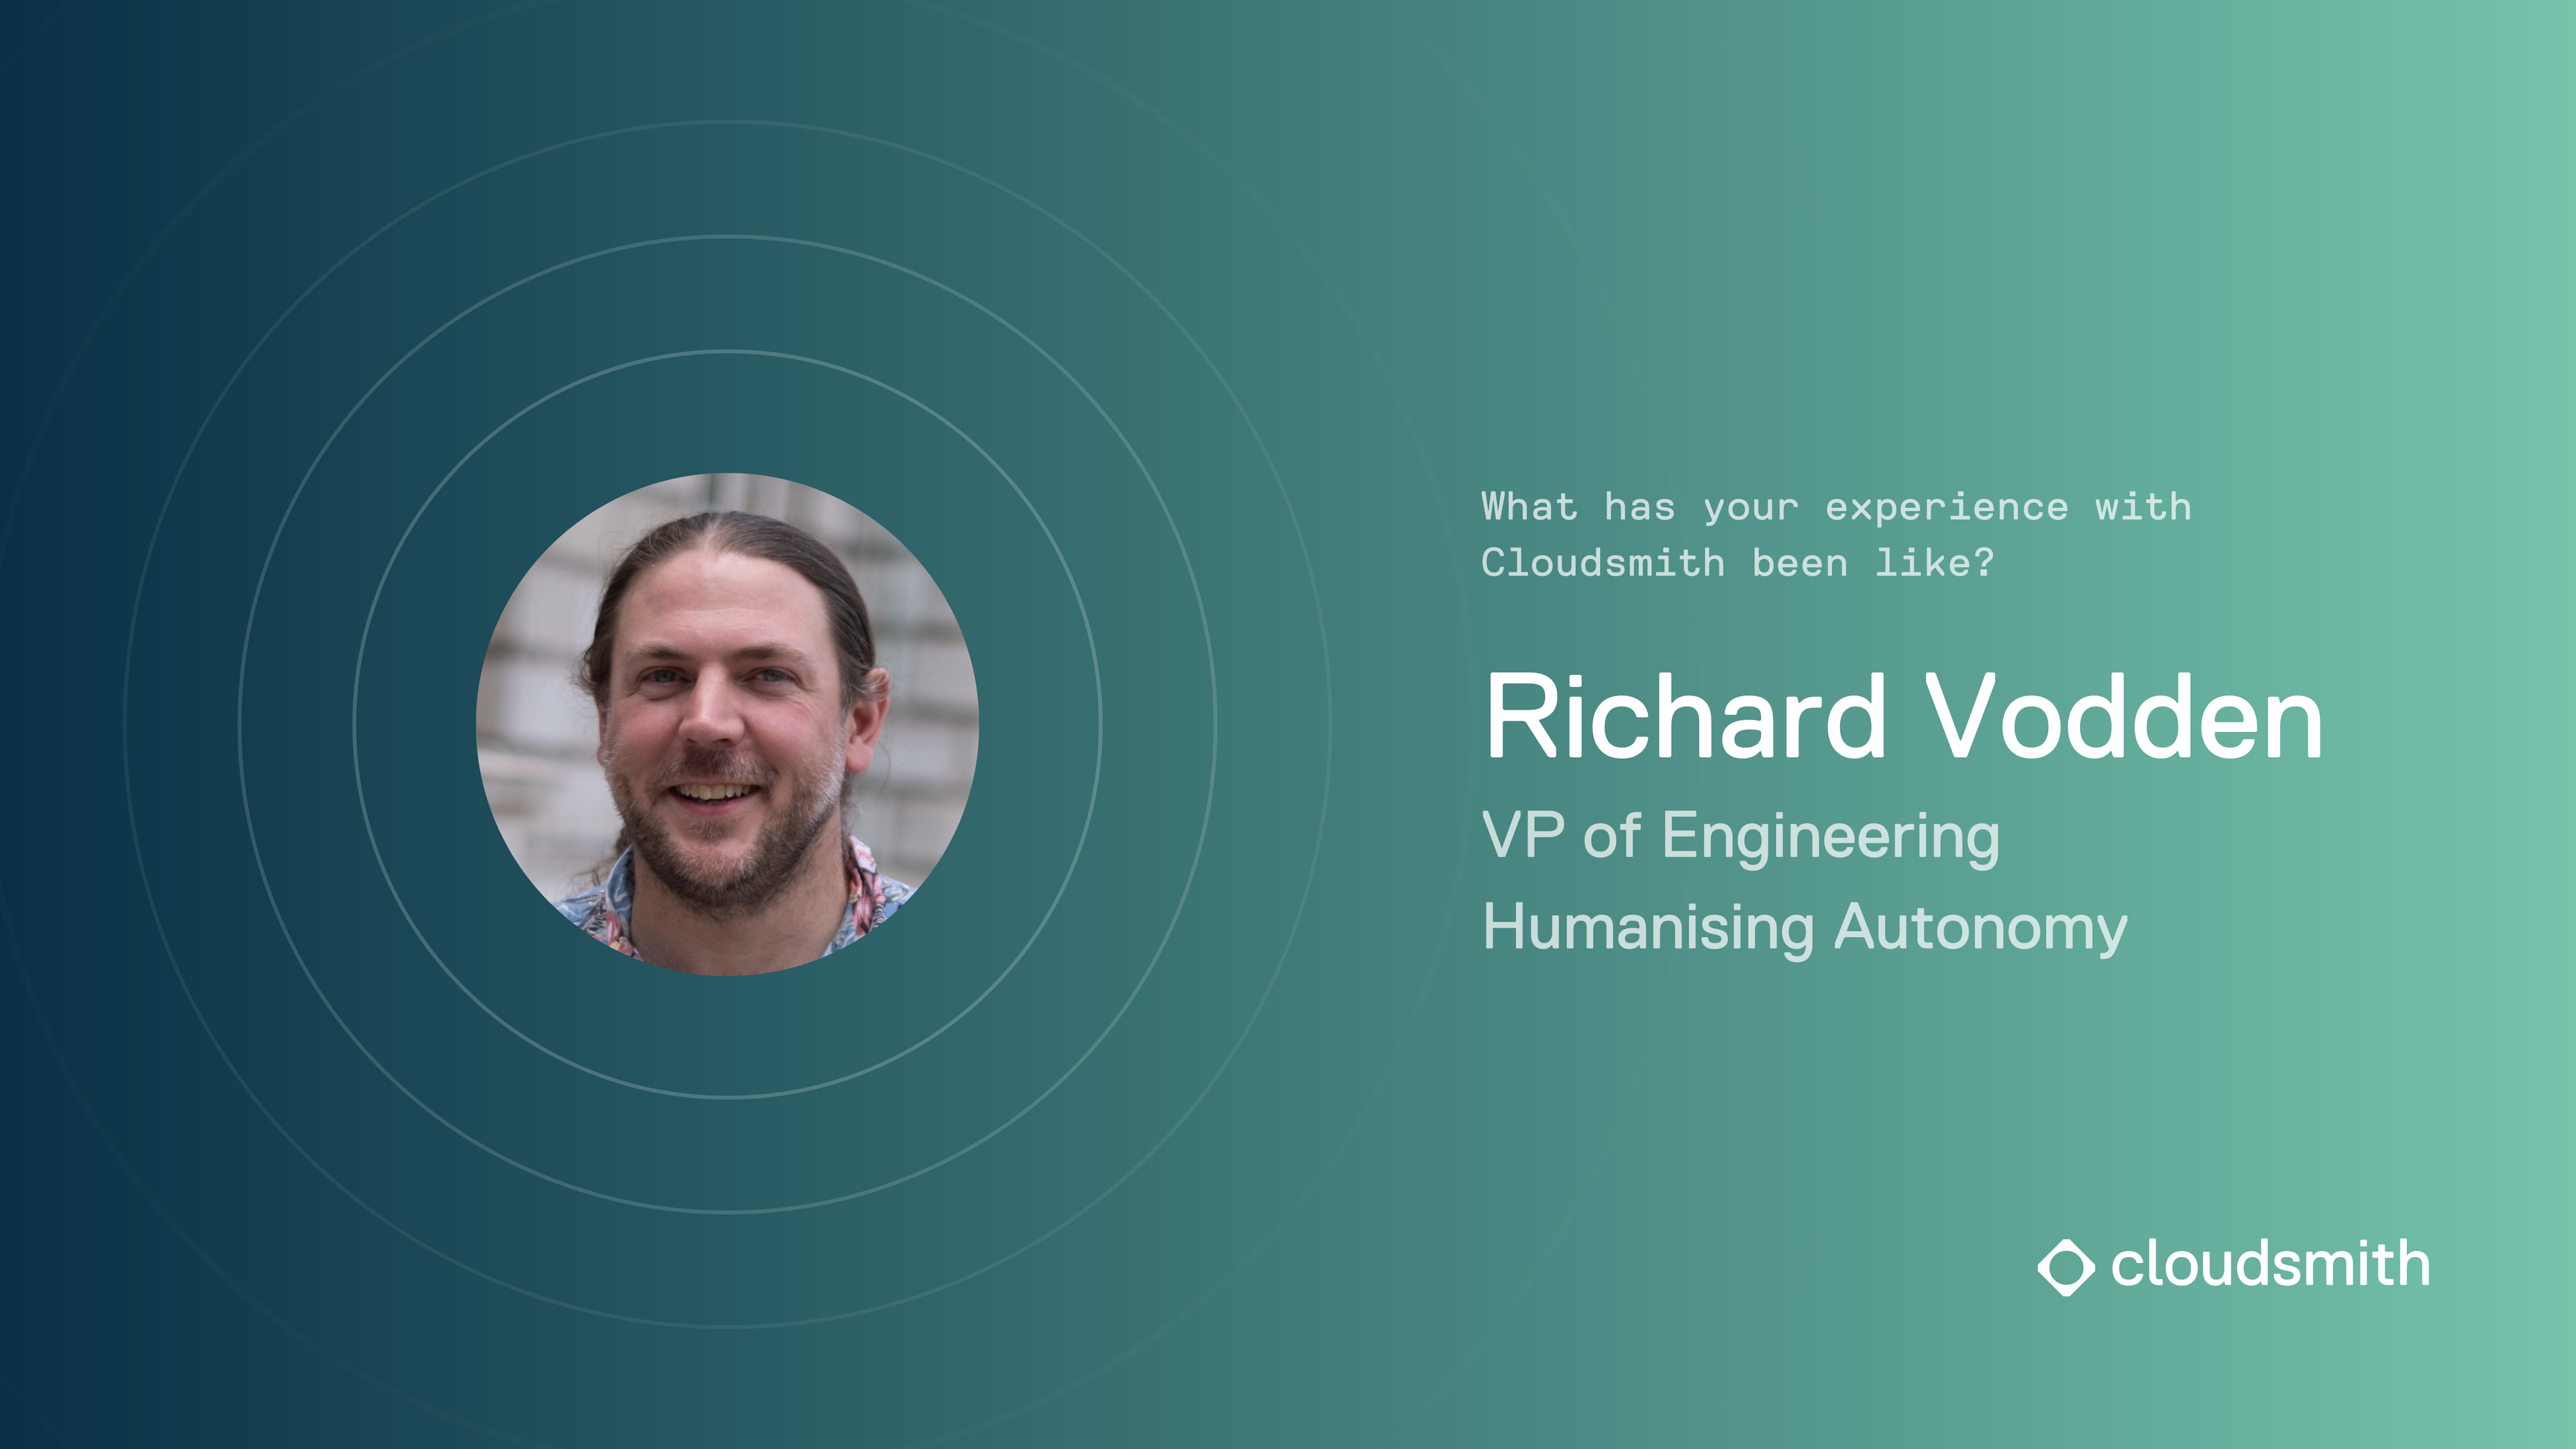 Richard Vodden, VP of Engineering at Humanising Autonomy answers the question: What has your experience with Cloudsmith been like?